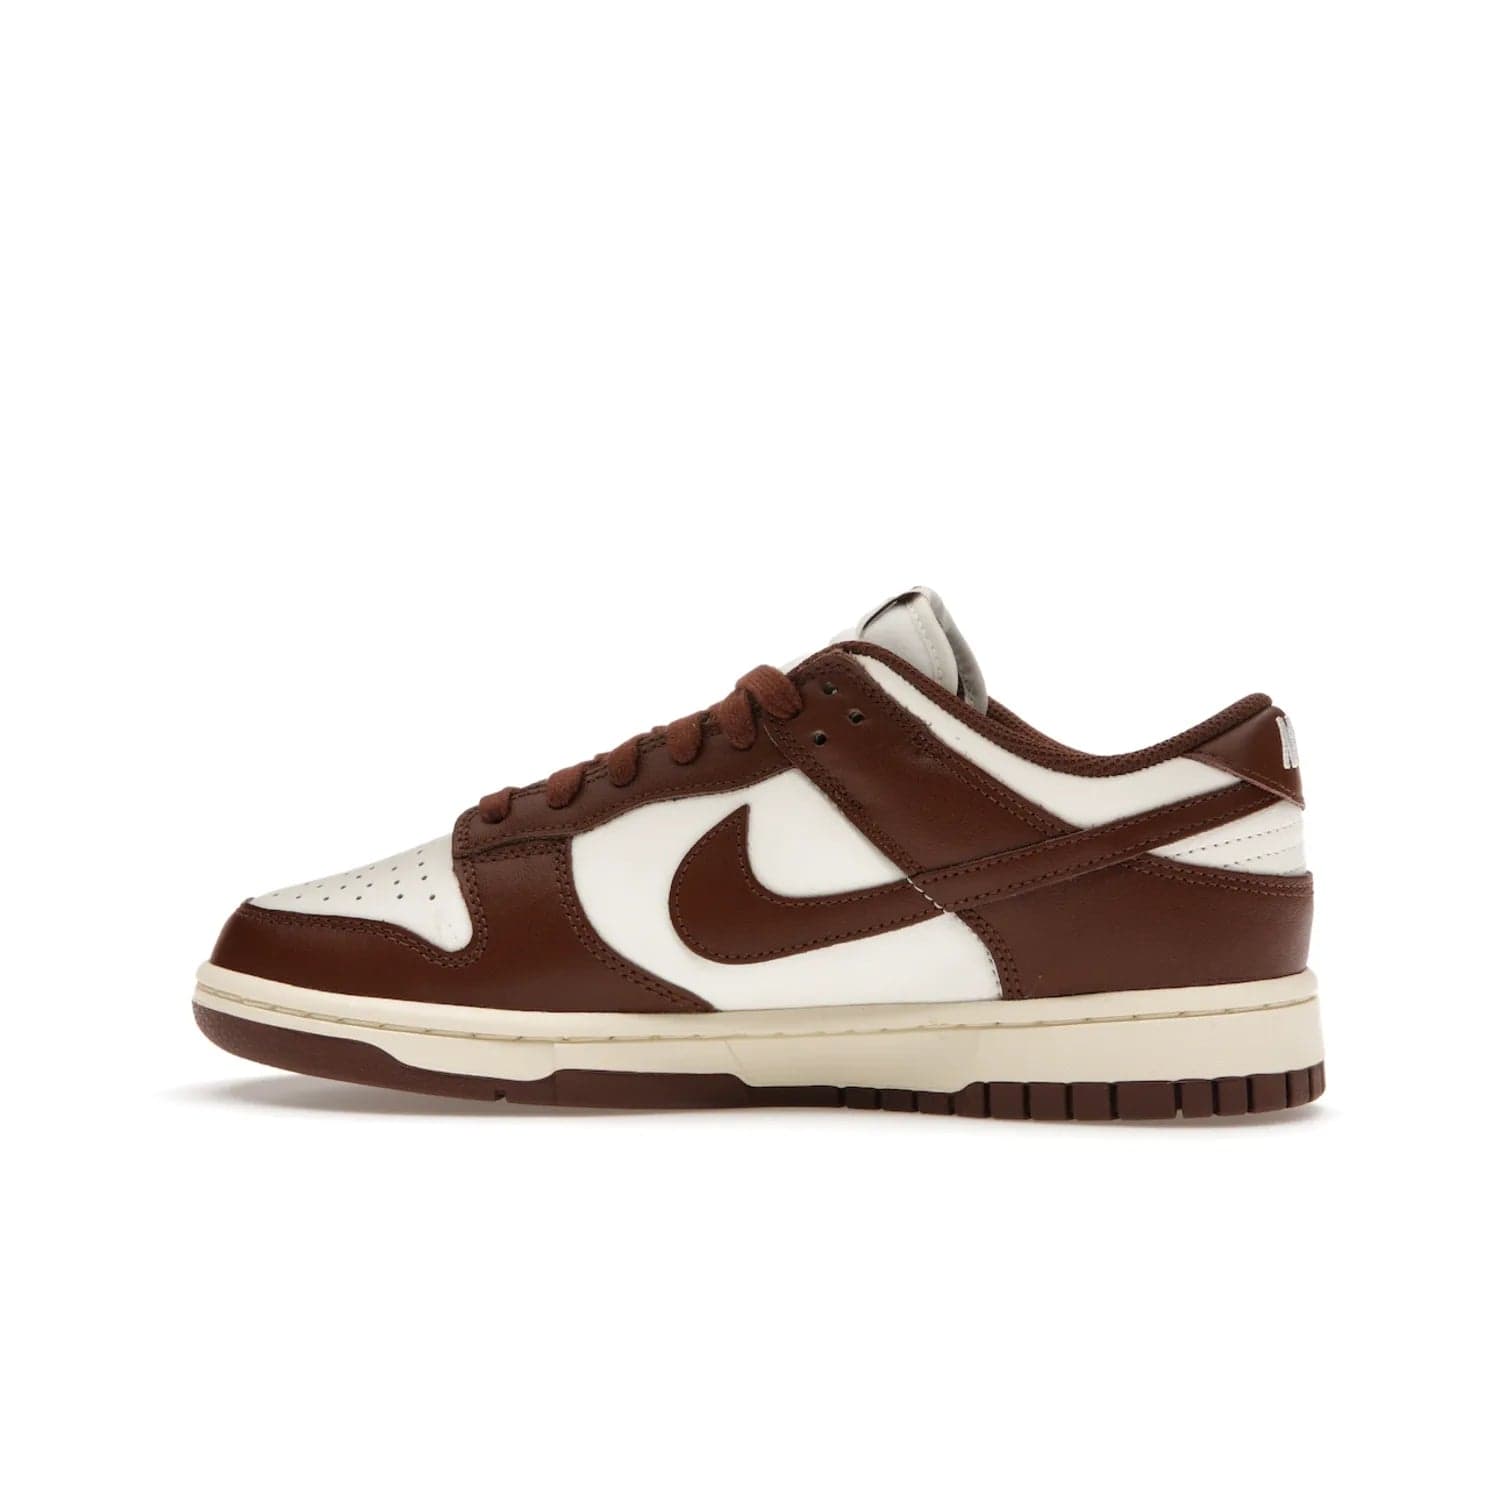 Nike Dunk Low Cacao Wow (Women's) - Image 20 - Only at www.BallersClubKickz.com - Revised
Get the Nike Dunk Low Cacao Wow and make a statement! Plush leather and a cool Cacao Wow finish bring together a unique mix of comfort and fashion that will turn heads. Boosted with a Coconut Milk hue. Shop today.